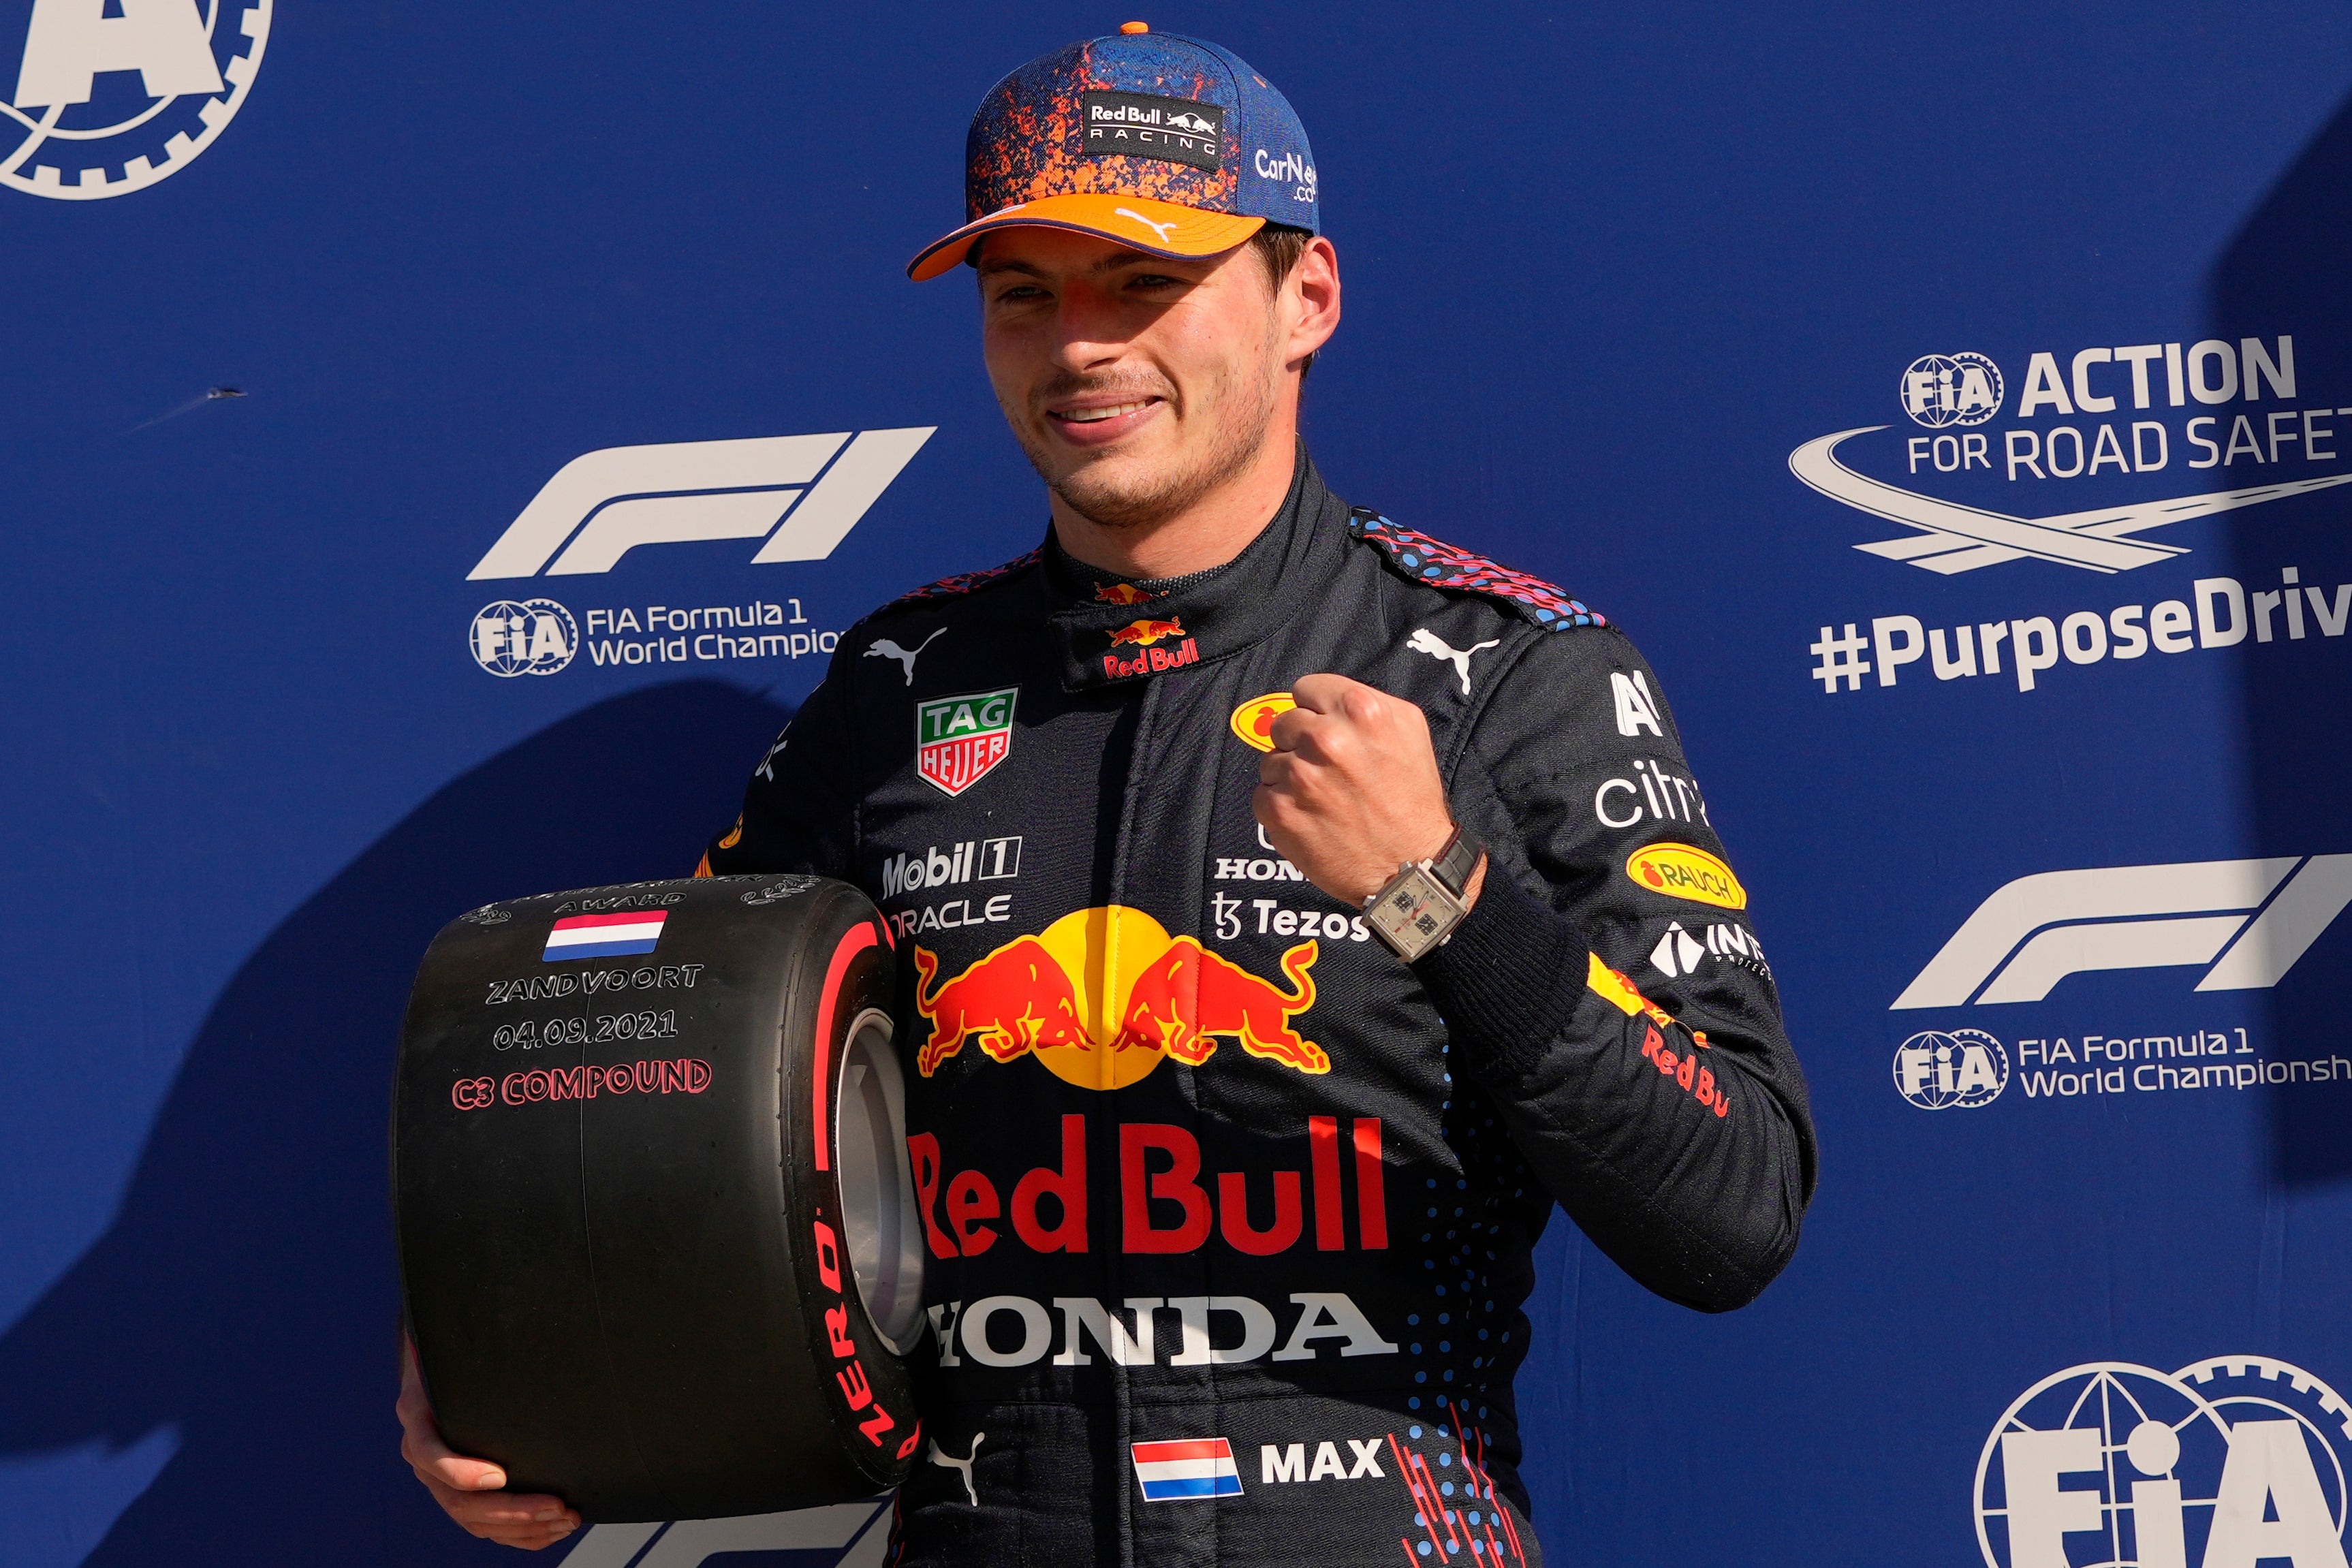 Max Verstappen celebrates after claiming pole position at the Dutch Grand Prix (Francisco Seco/AP)